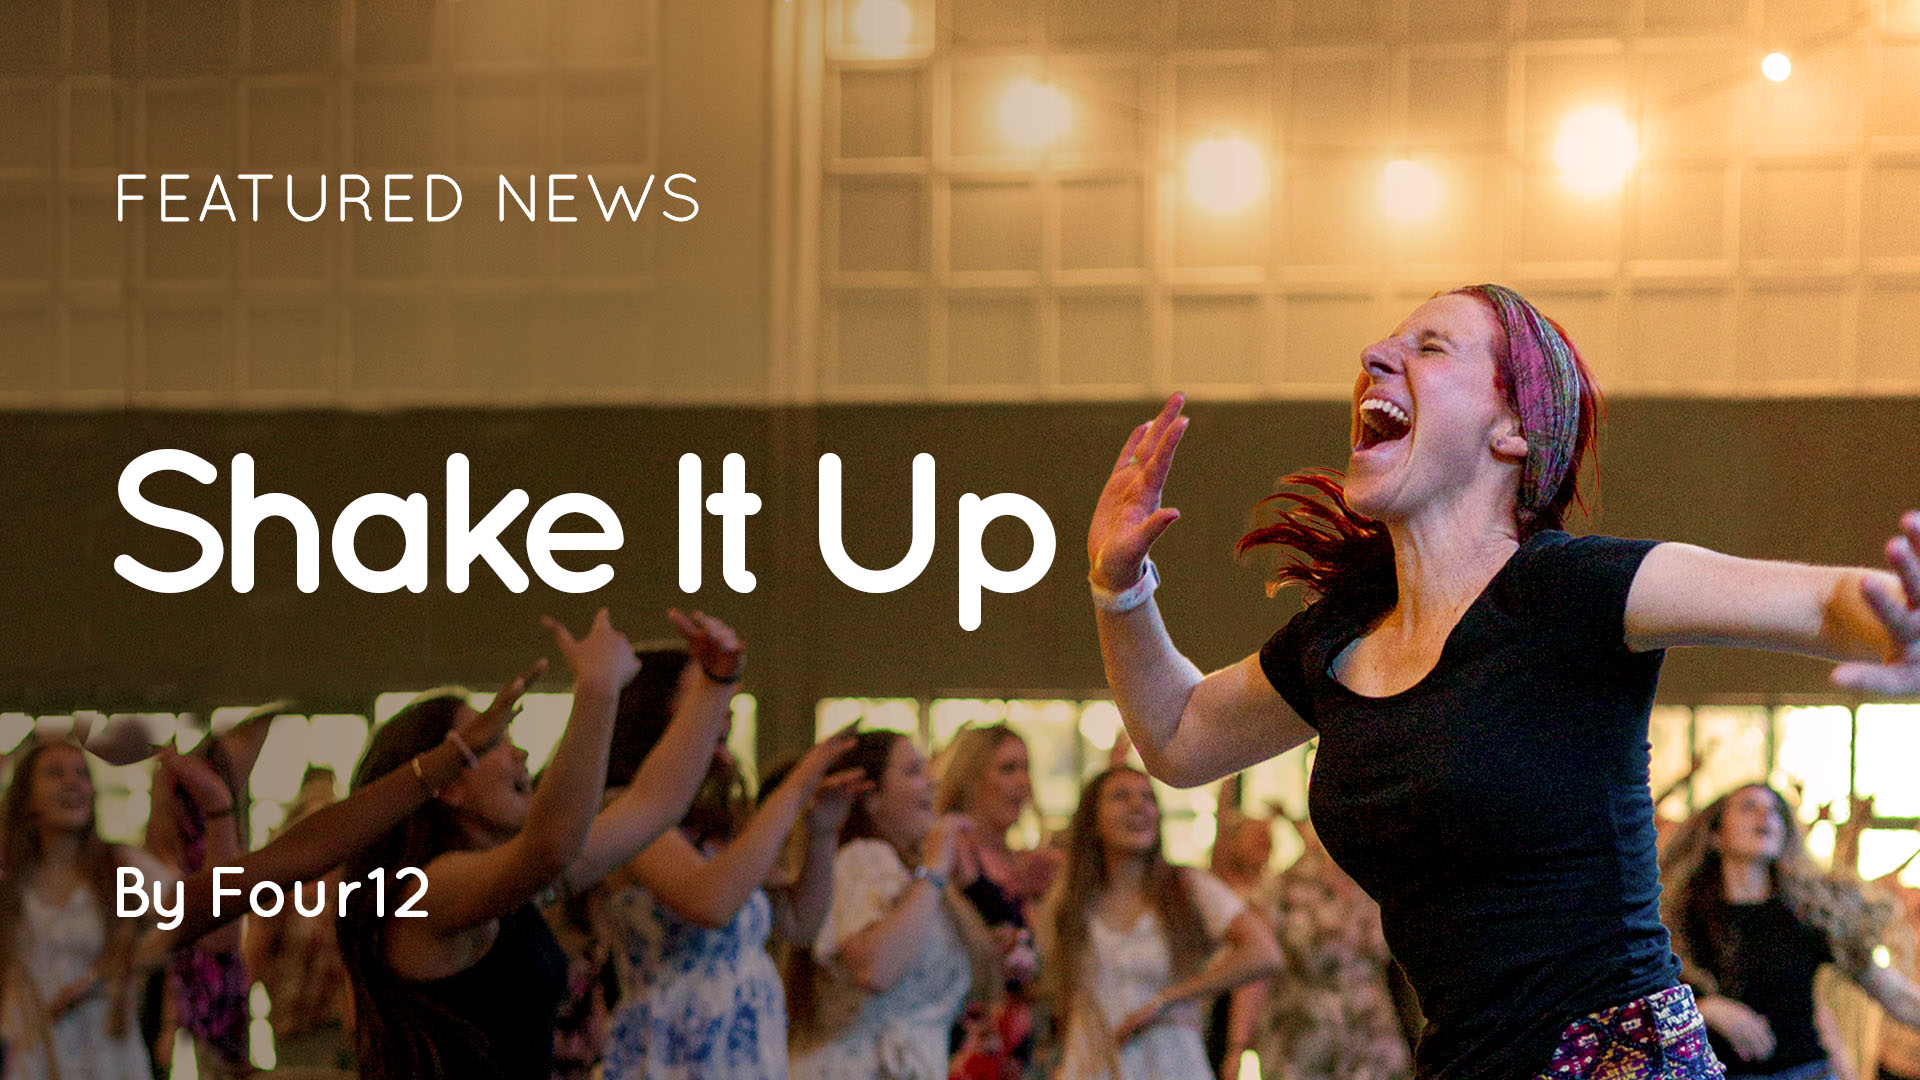 News image for "Shake It Up" about the Ladies Gathering Northern RSA